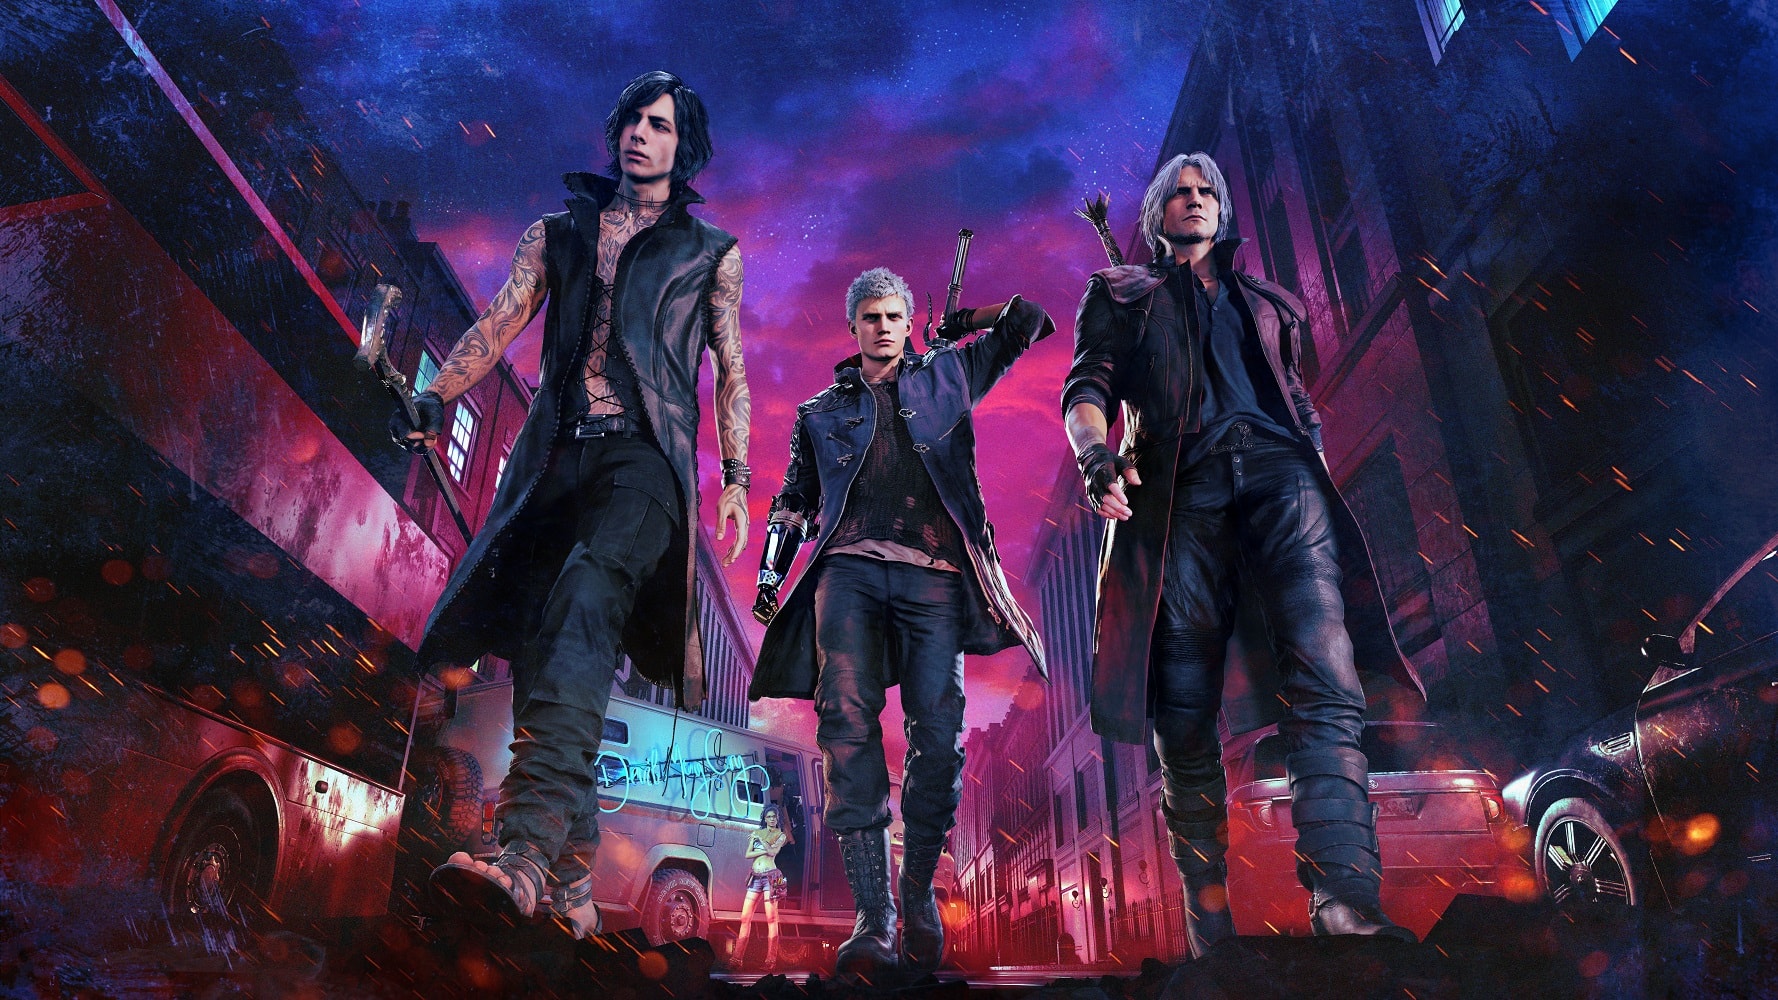 Devil may cry 5 tgs